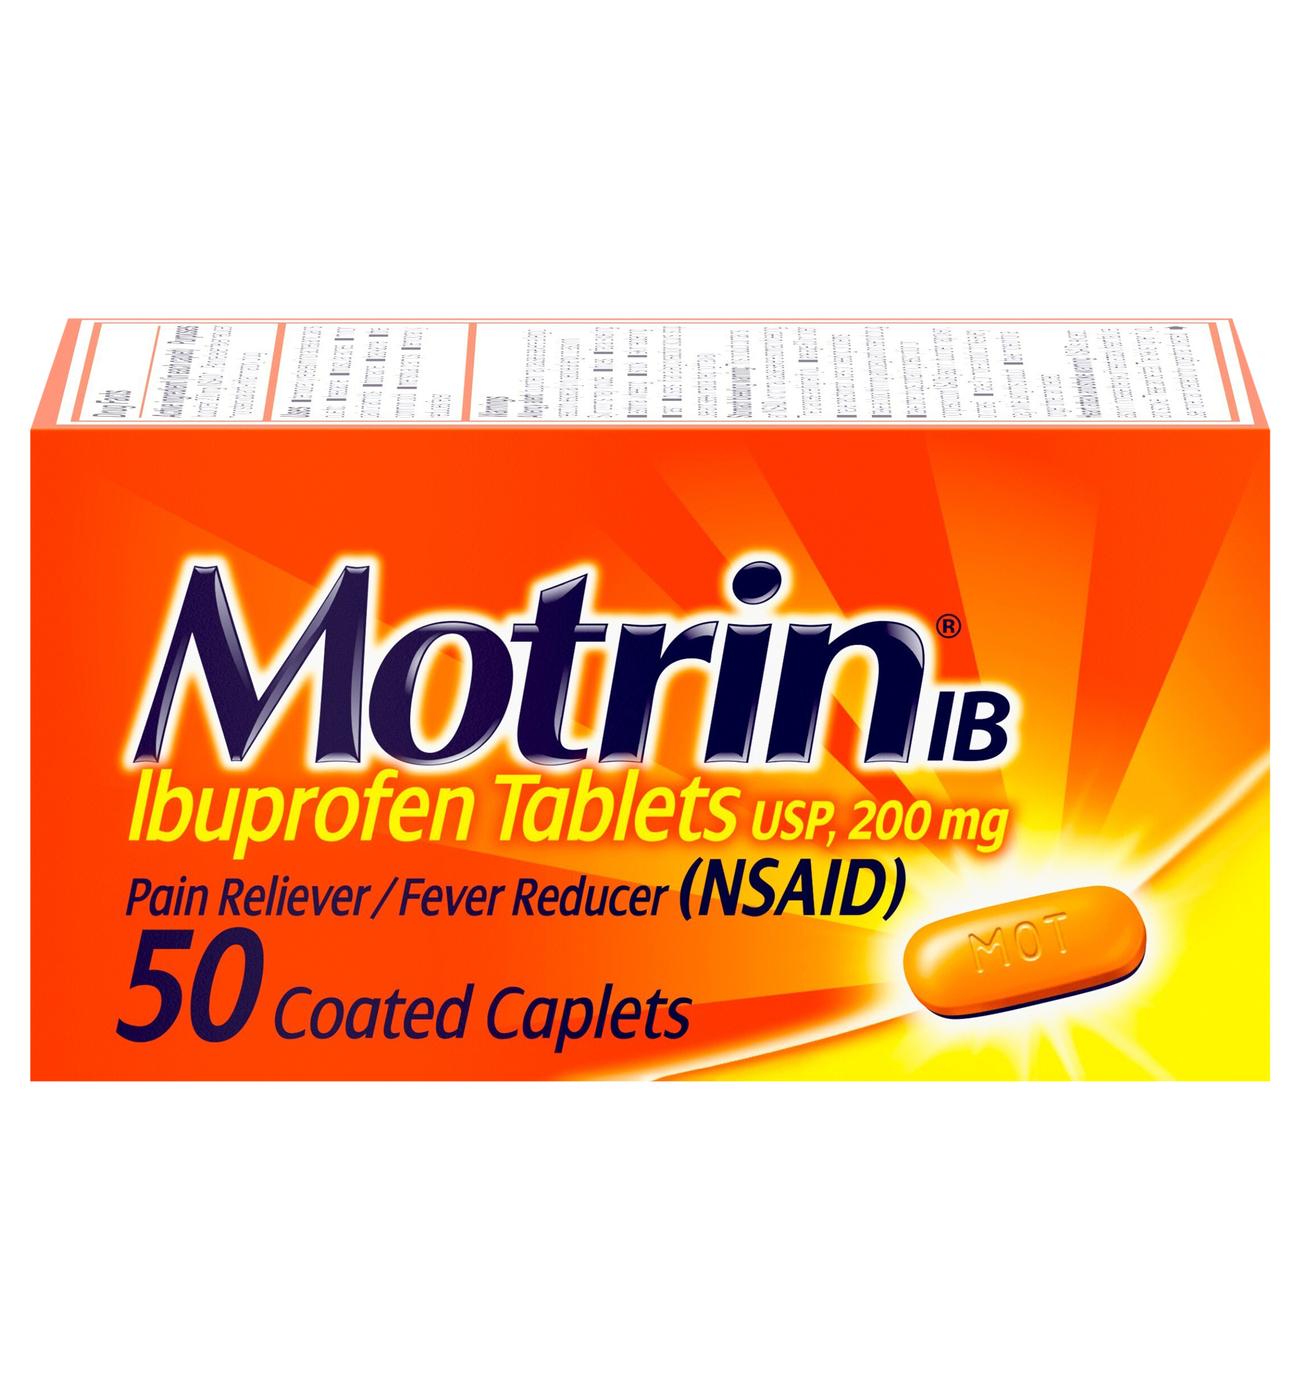 Motrin IB Pain Reliever Tablets; image 1 of 5